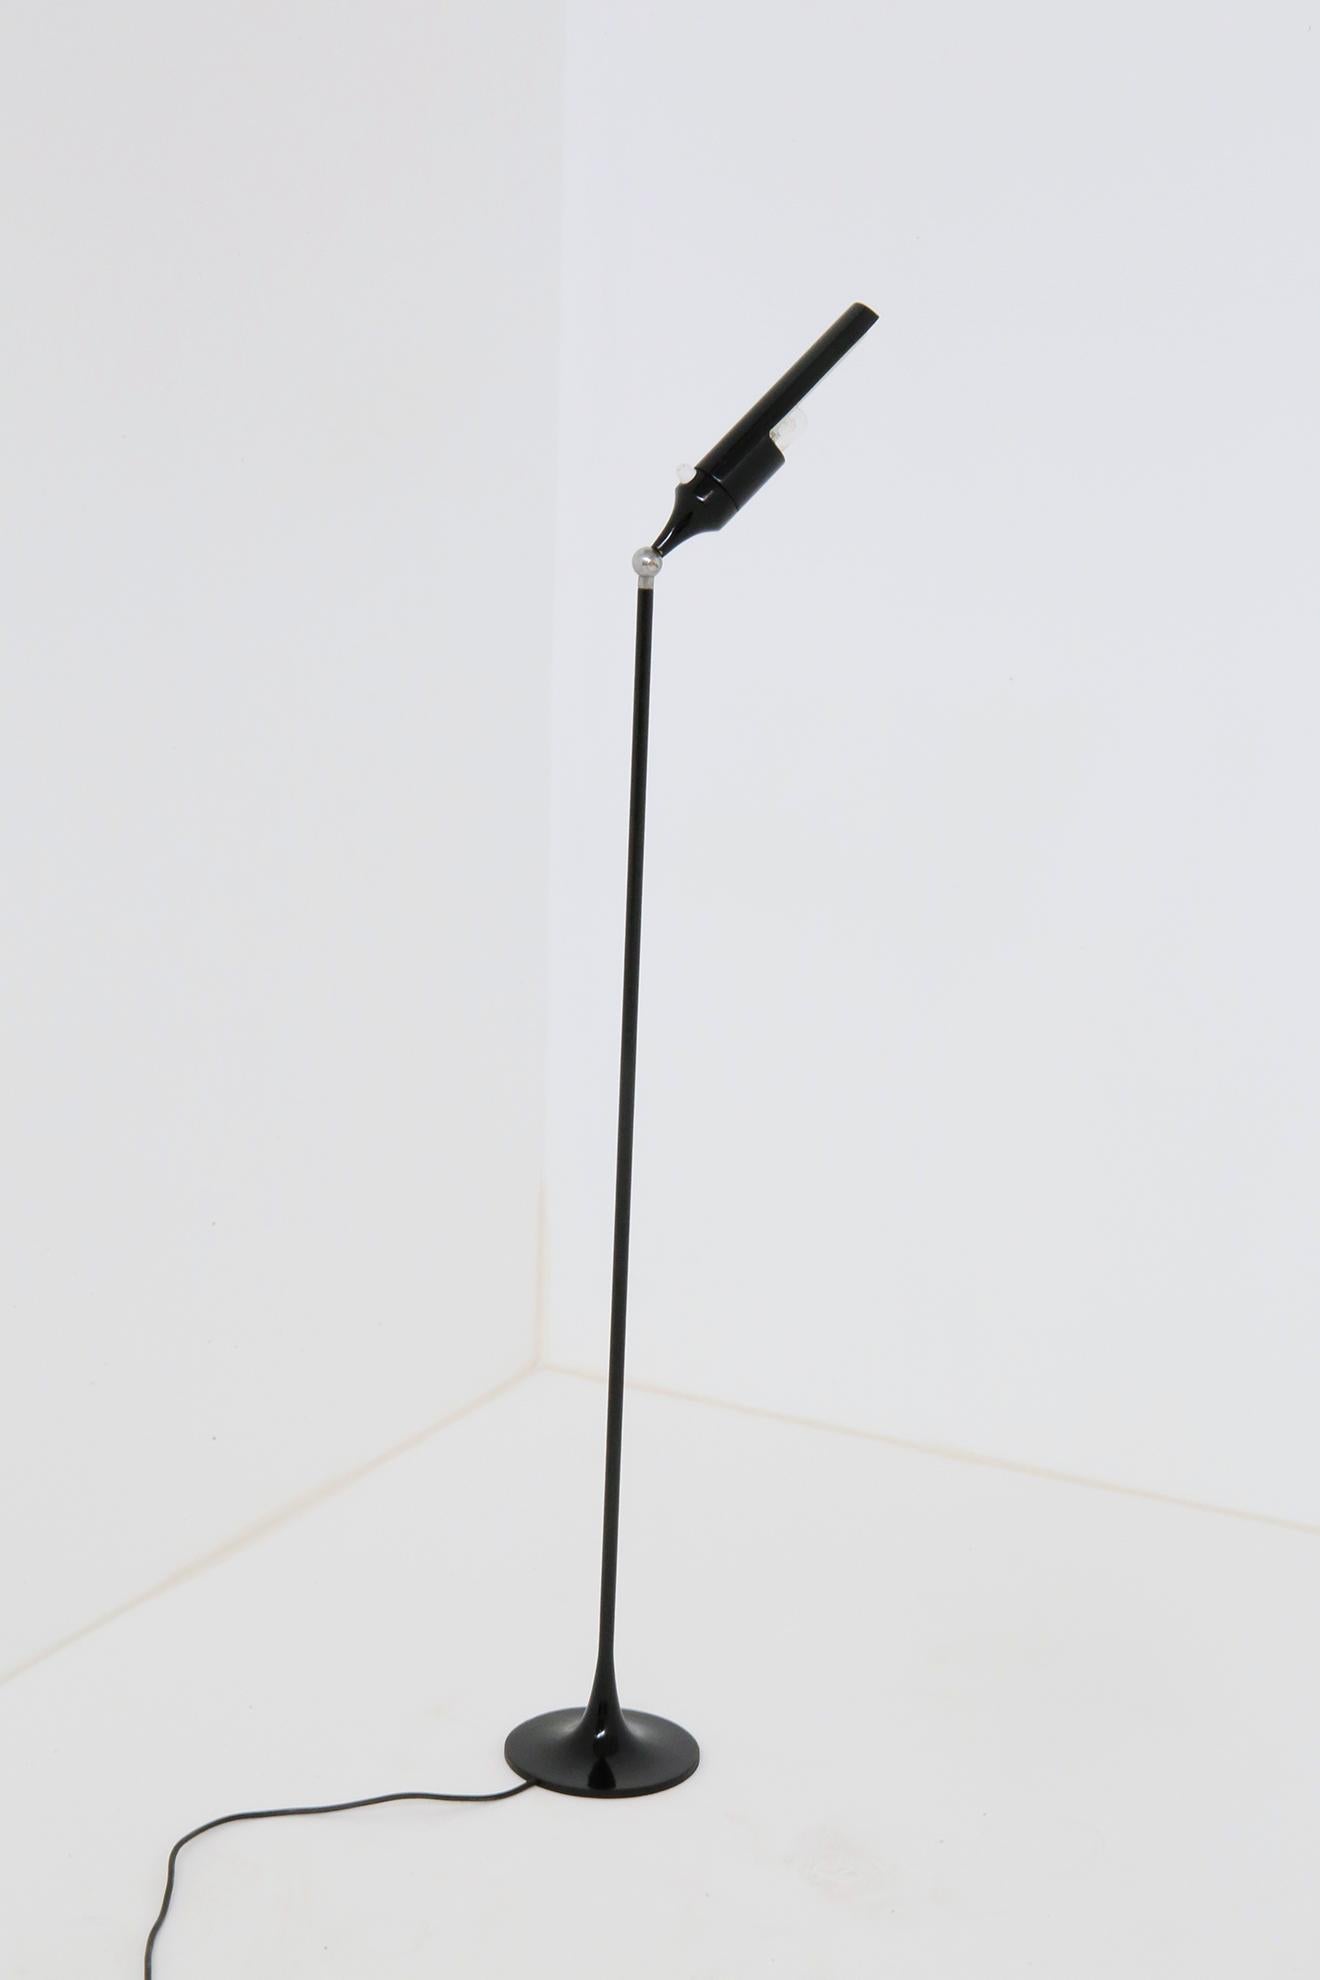 Modern floor lamp, model n. 1086, designed by Gino Sarfatti in 1961, for Arteluce, Italy. The lamp has been restored. Its construction in nickel-plated brass tube with variable adjustment. Its lampshade is in black painted aluminium with swivel